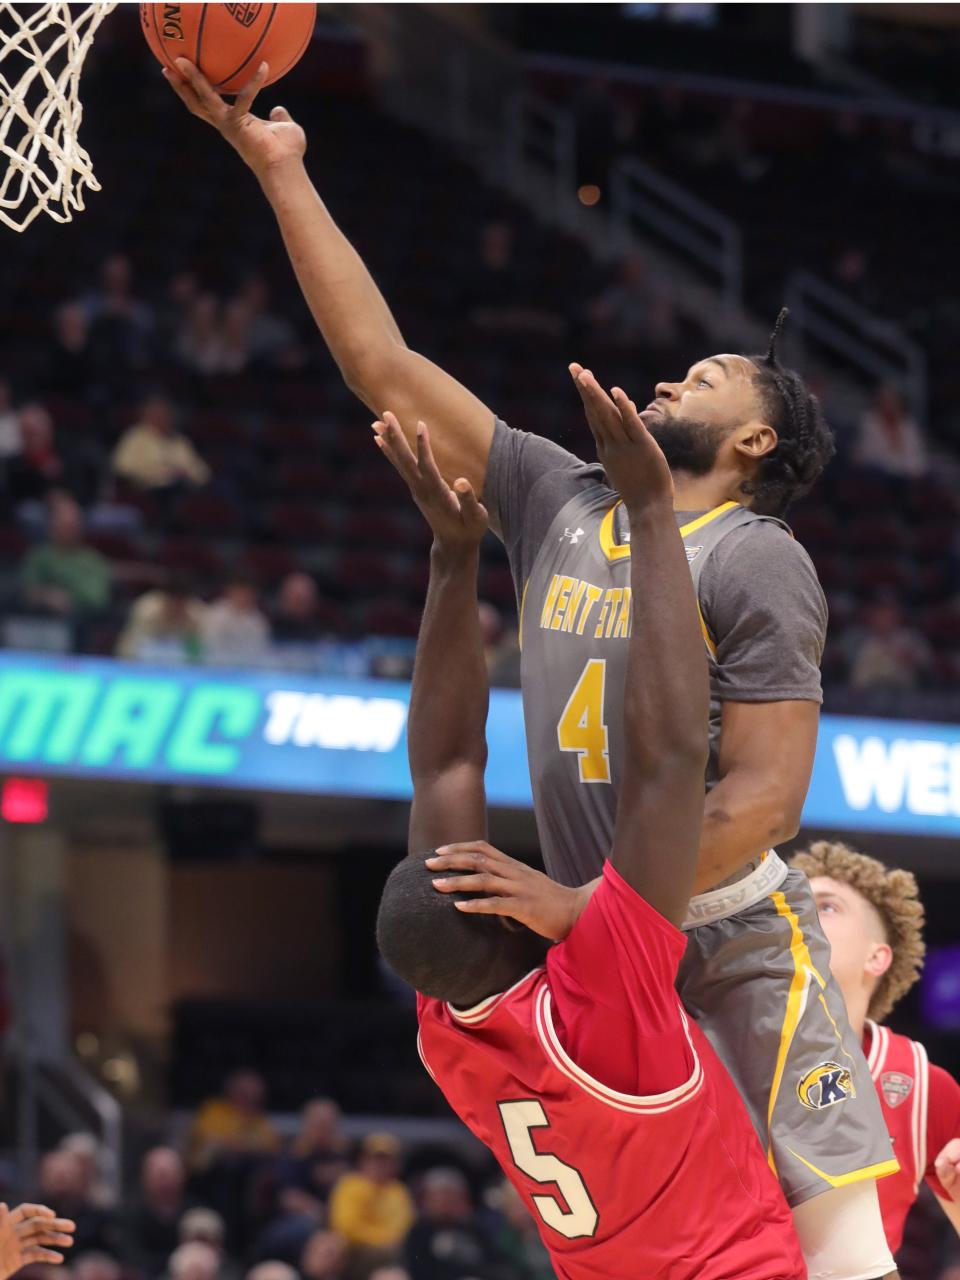 Kent State's Andrew Garcia drives over Miami's Precious Ayah for a second-half basket in a Mid-American Conference Tournament quarterfinal game on Thursday March 10, 2022 in Cleveland, Ohio, at Rocket Mortgage FieldHouse.